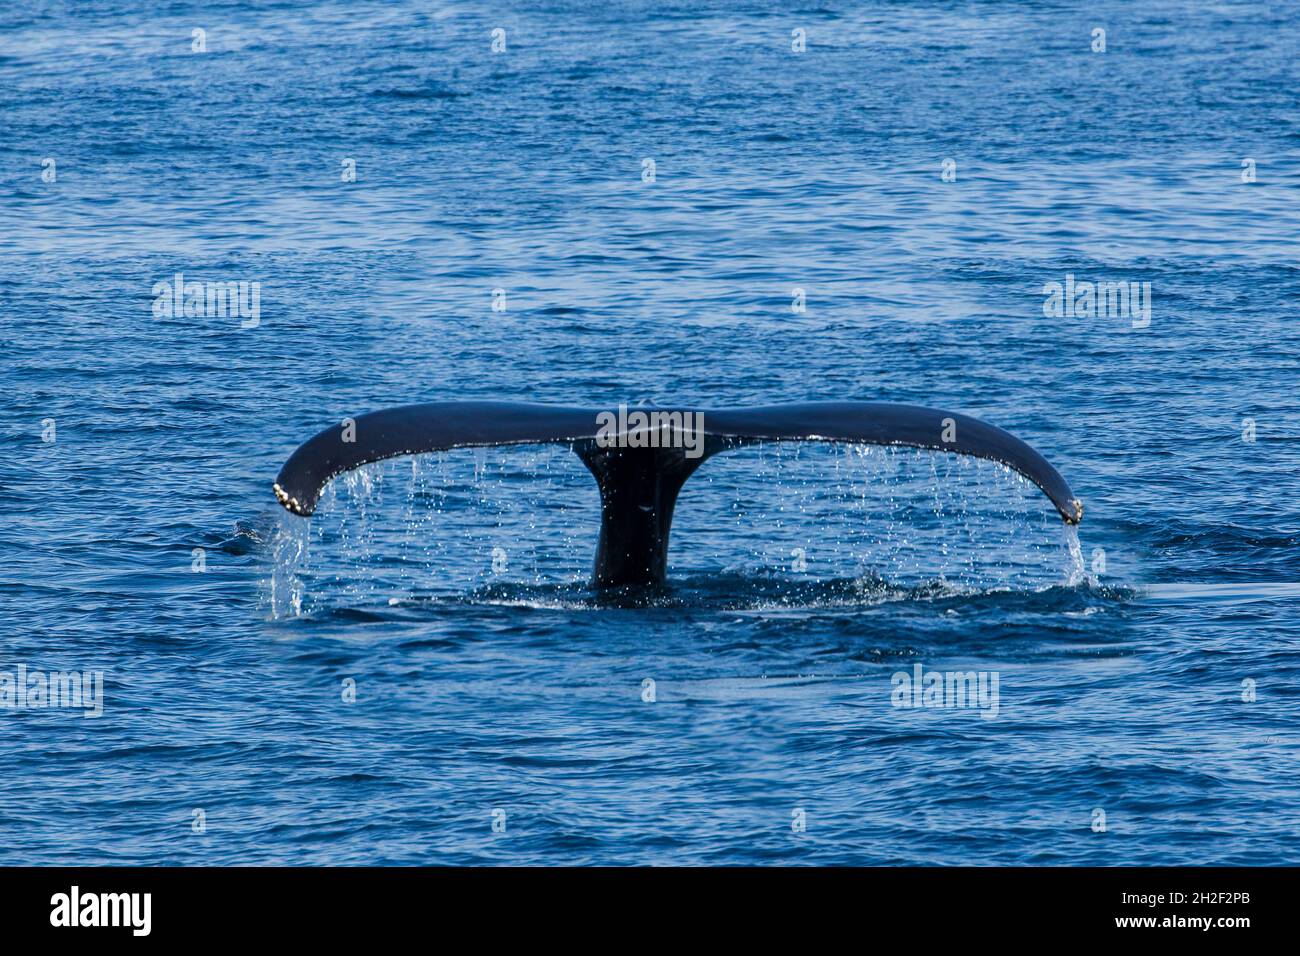 A Humpback Whale lifts its tail while diving in Samana Bay, Dominican Republic. Stock Photo